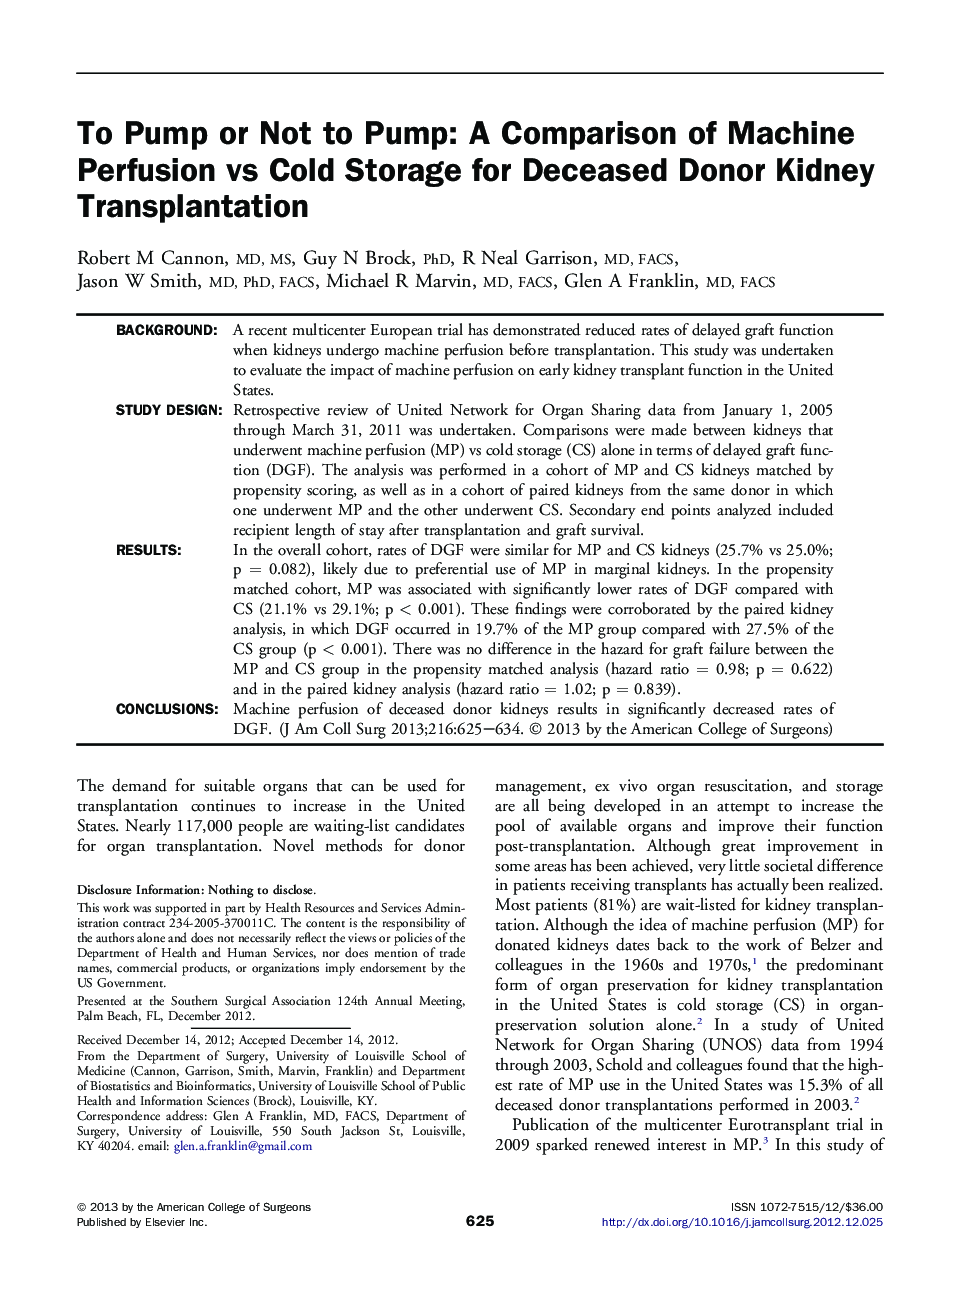 To Pump or Not to Pump: A Comparison of Machine Perfusion vs Cold Storage for Deceased Donor Kidney Transplantation 